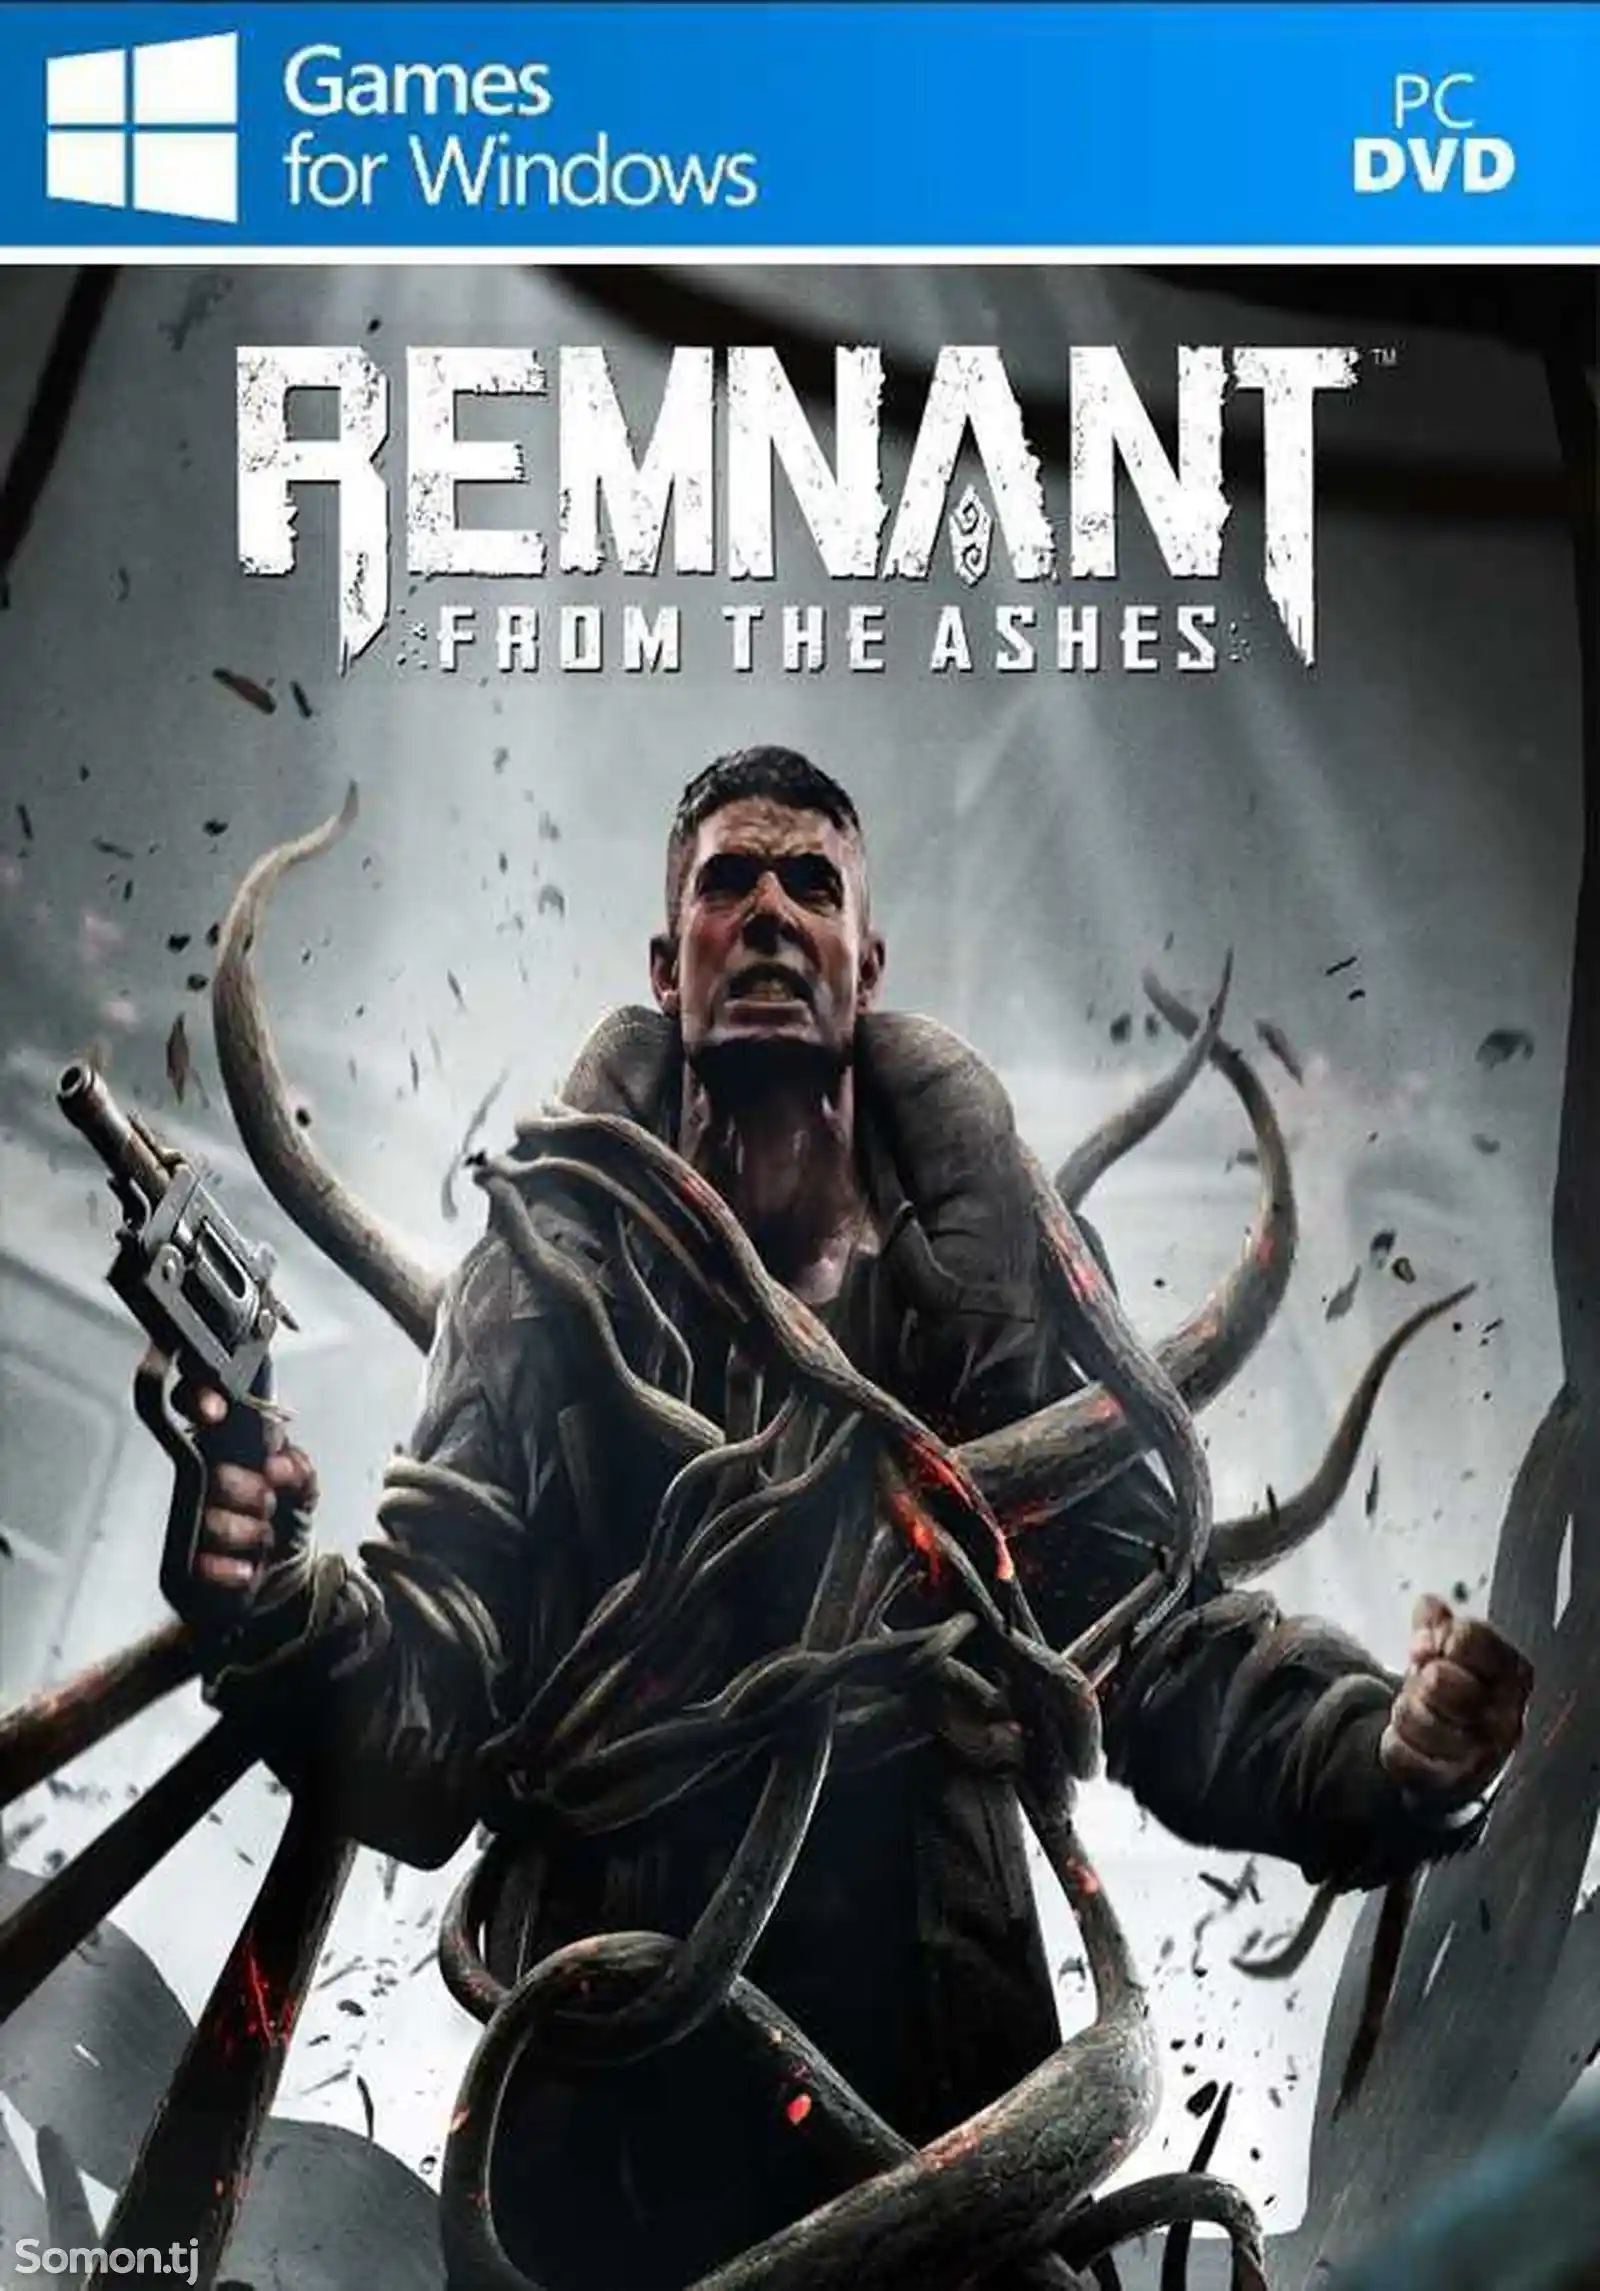 Игра Remnant from the ashes для компьютера-пк-pc-1